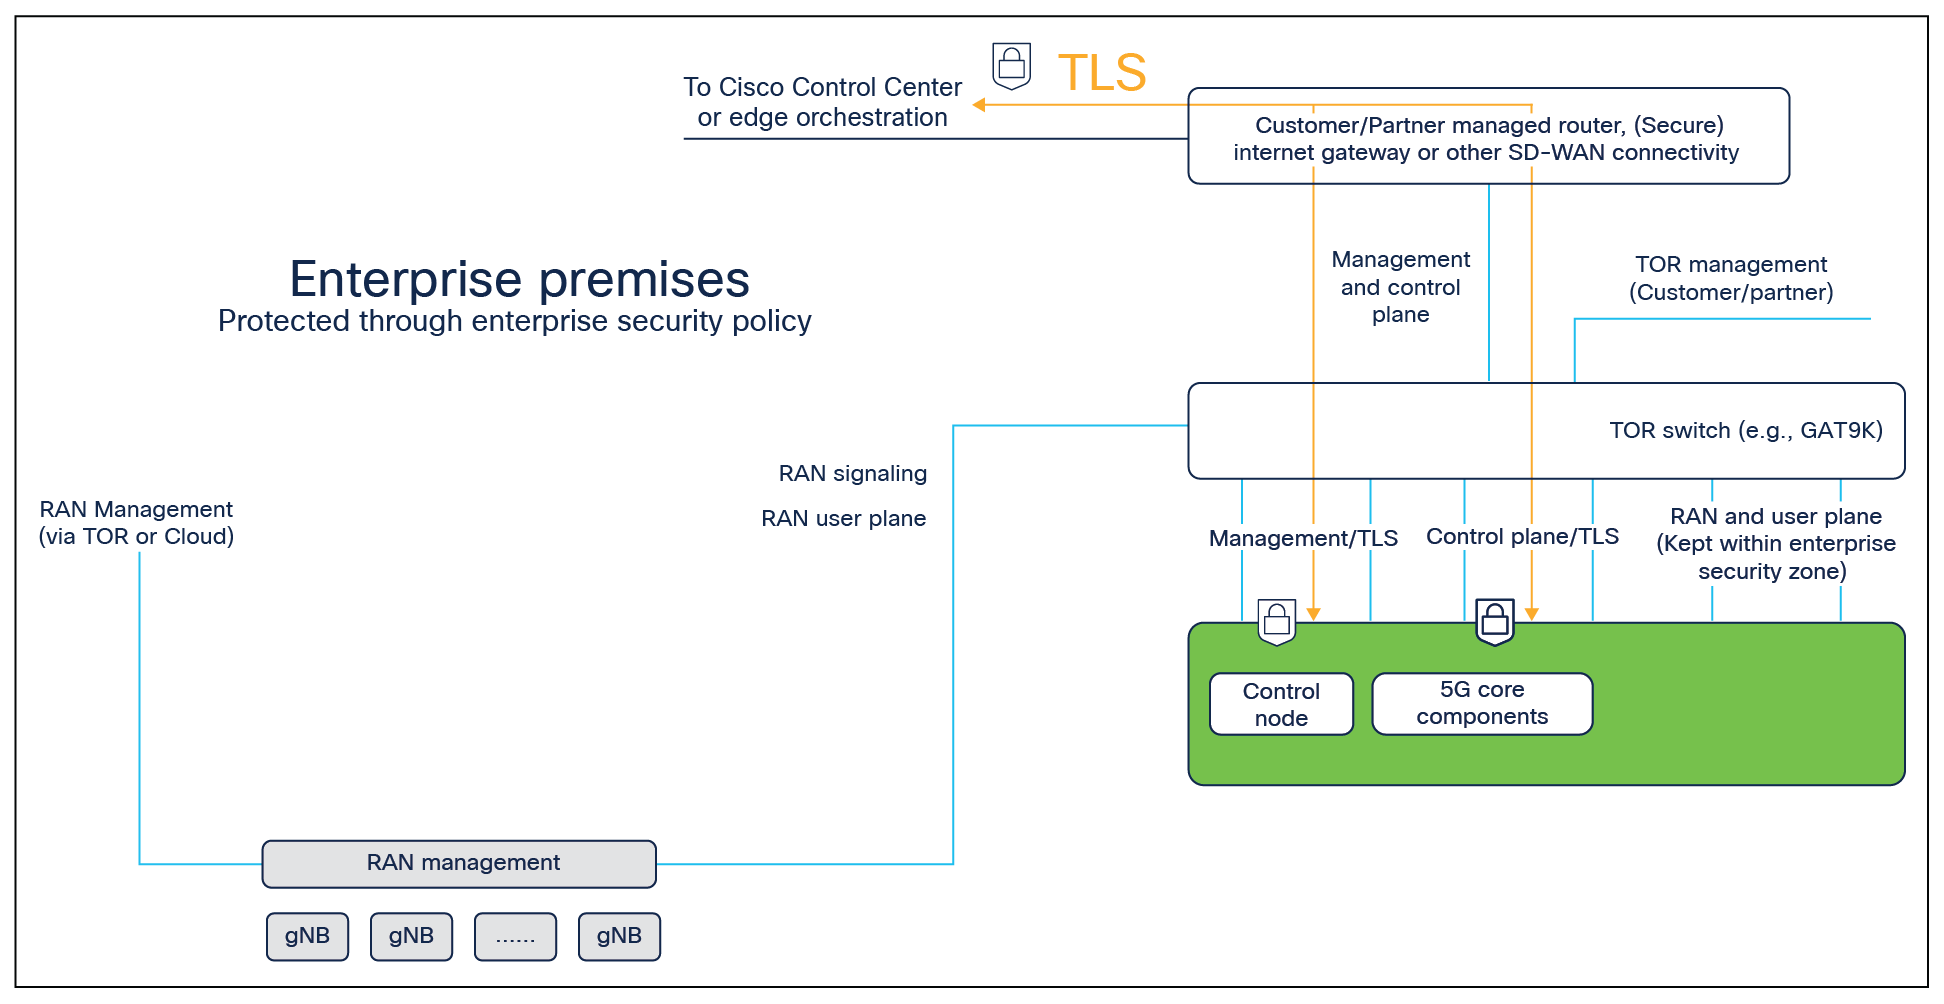 Secure connectivity toward the cloud from the edge using TLS tunnels